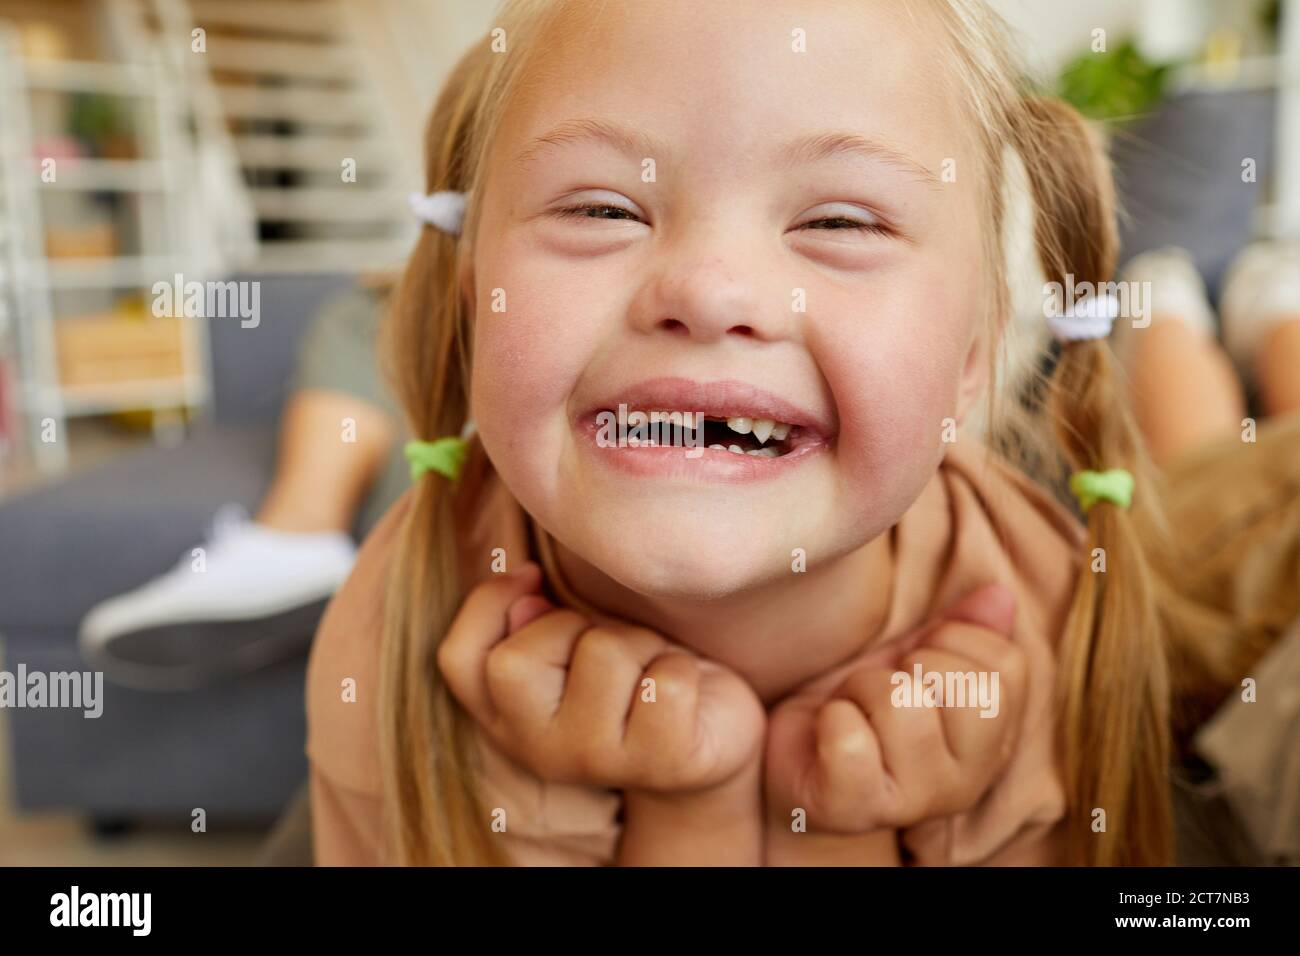 Close up portrait of blonde girl with down syndrome smiling happily looking at camera while lying on sofa at home Stock Photo